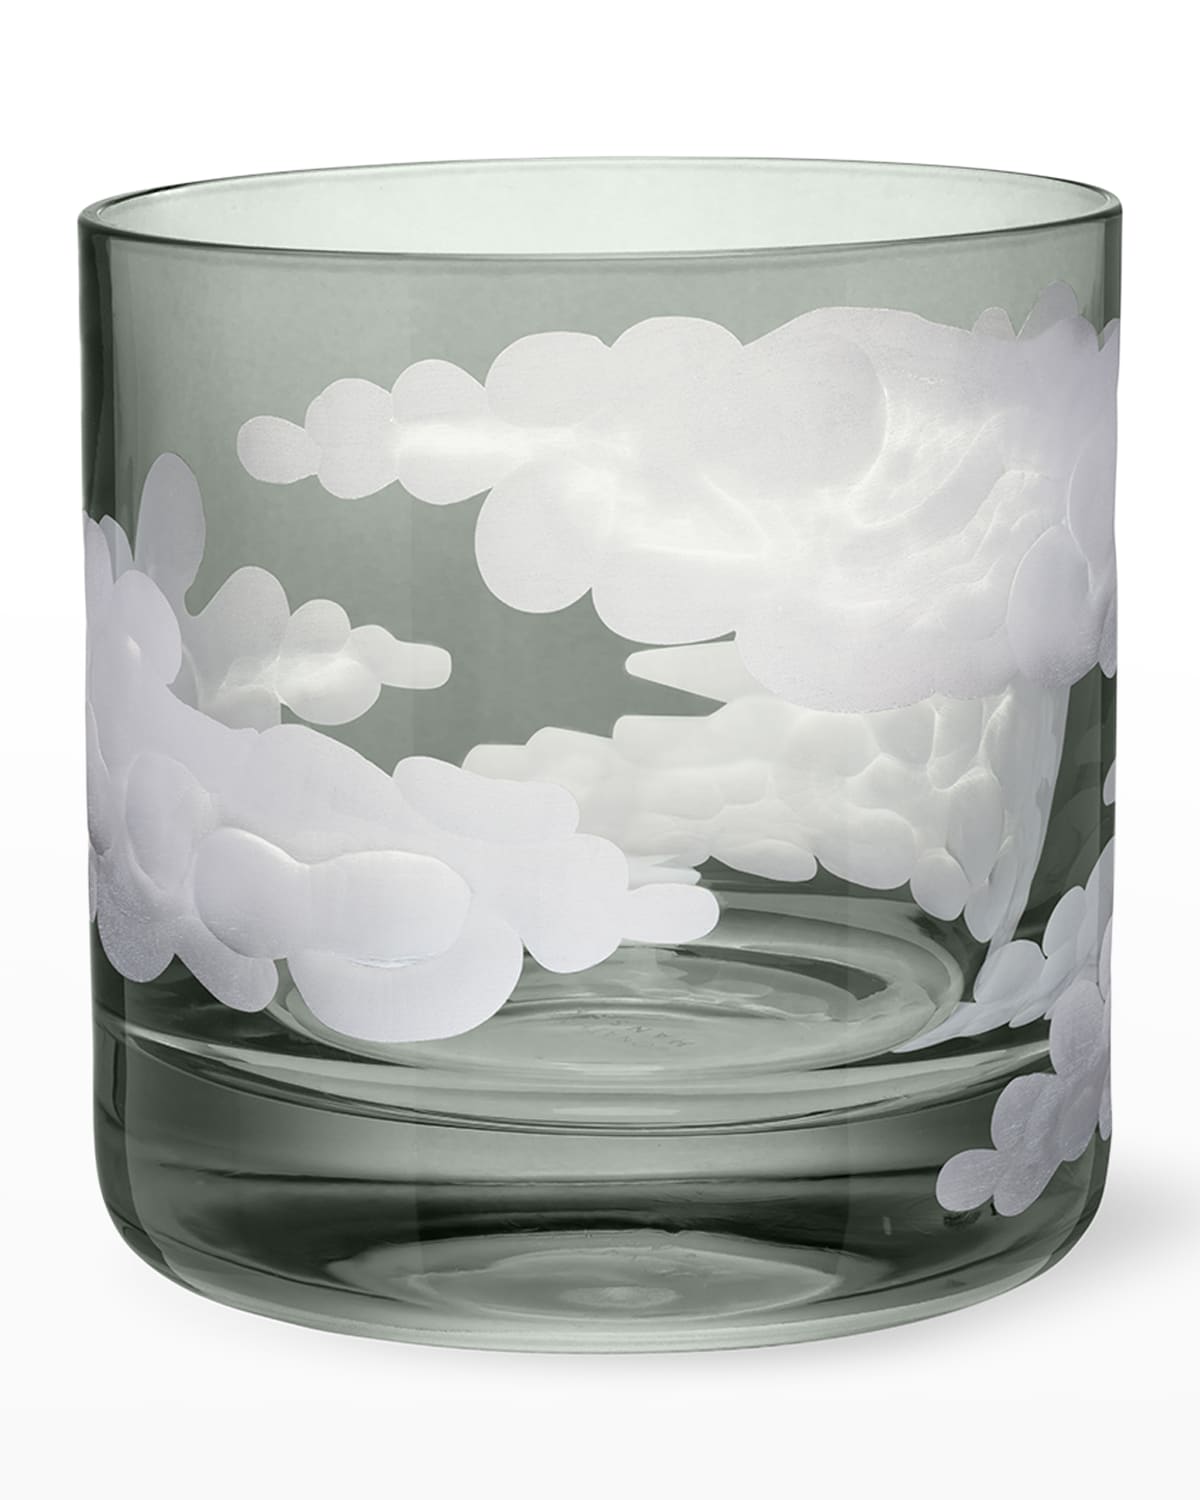 In The Clouds Rocks Tumbler, Gray - 8 oz.